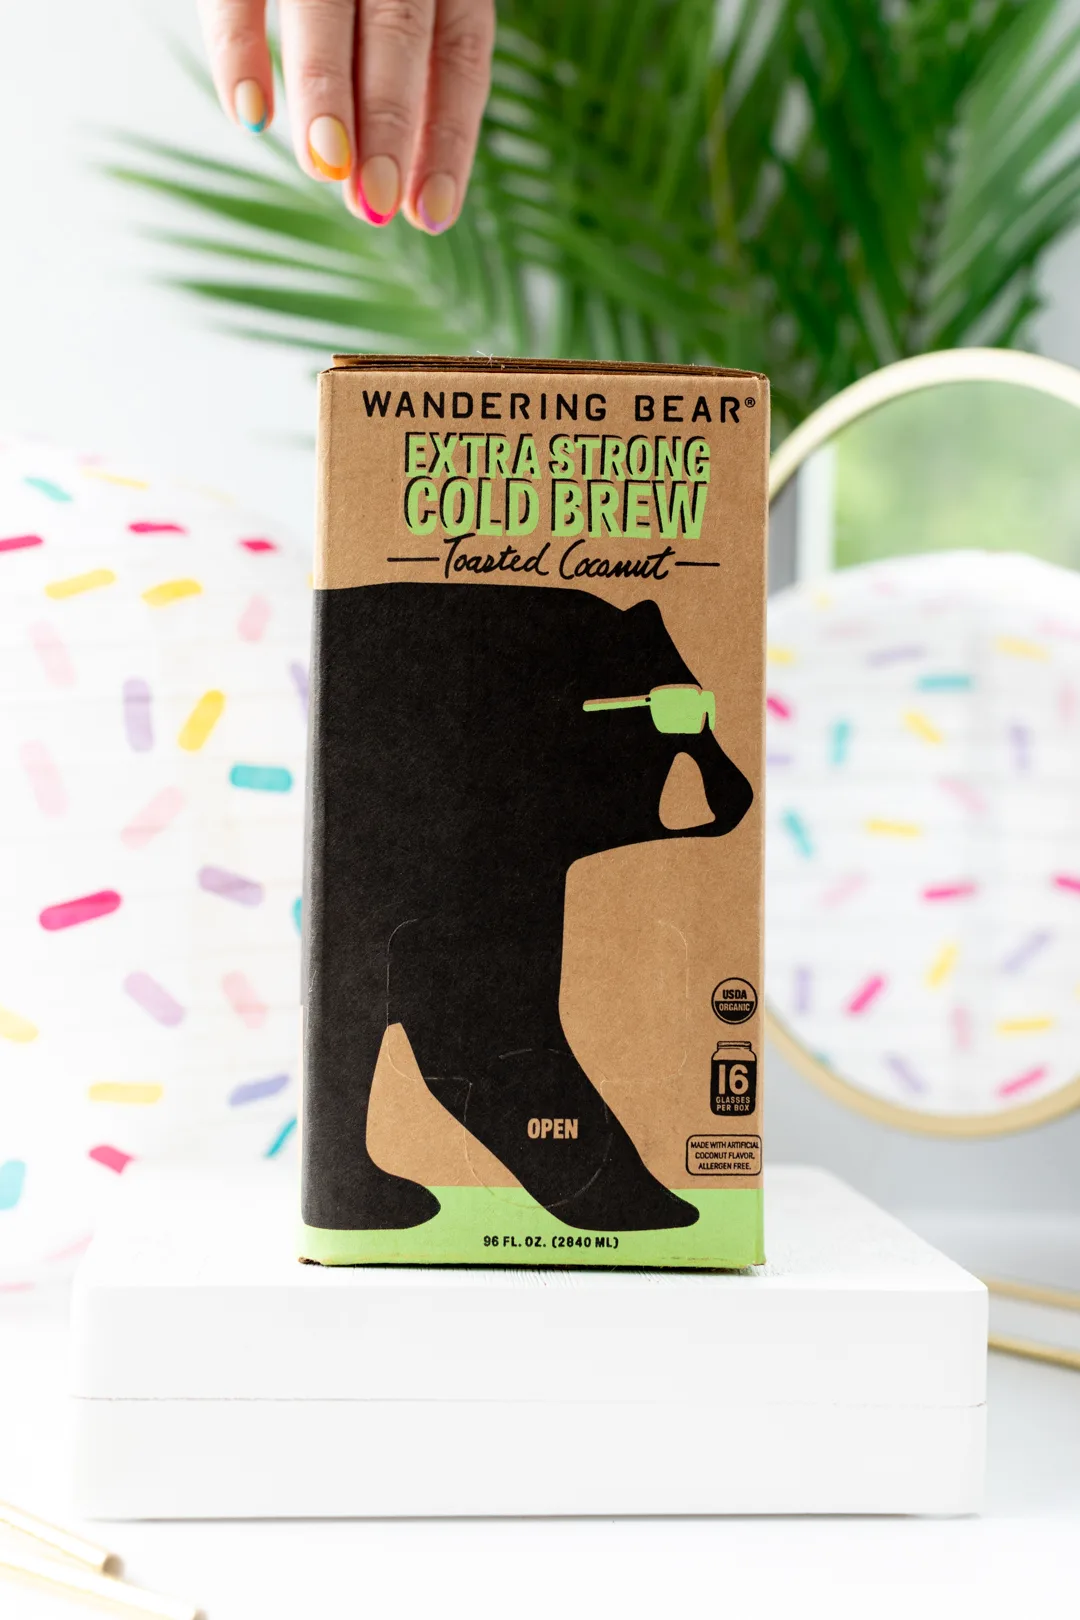 wandering bear extra strong cold brew box, woman reaching for it